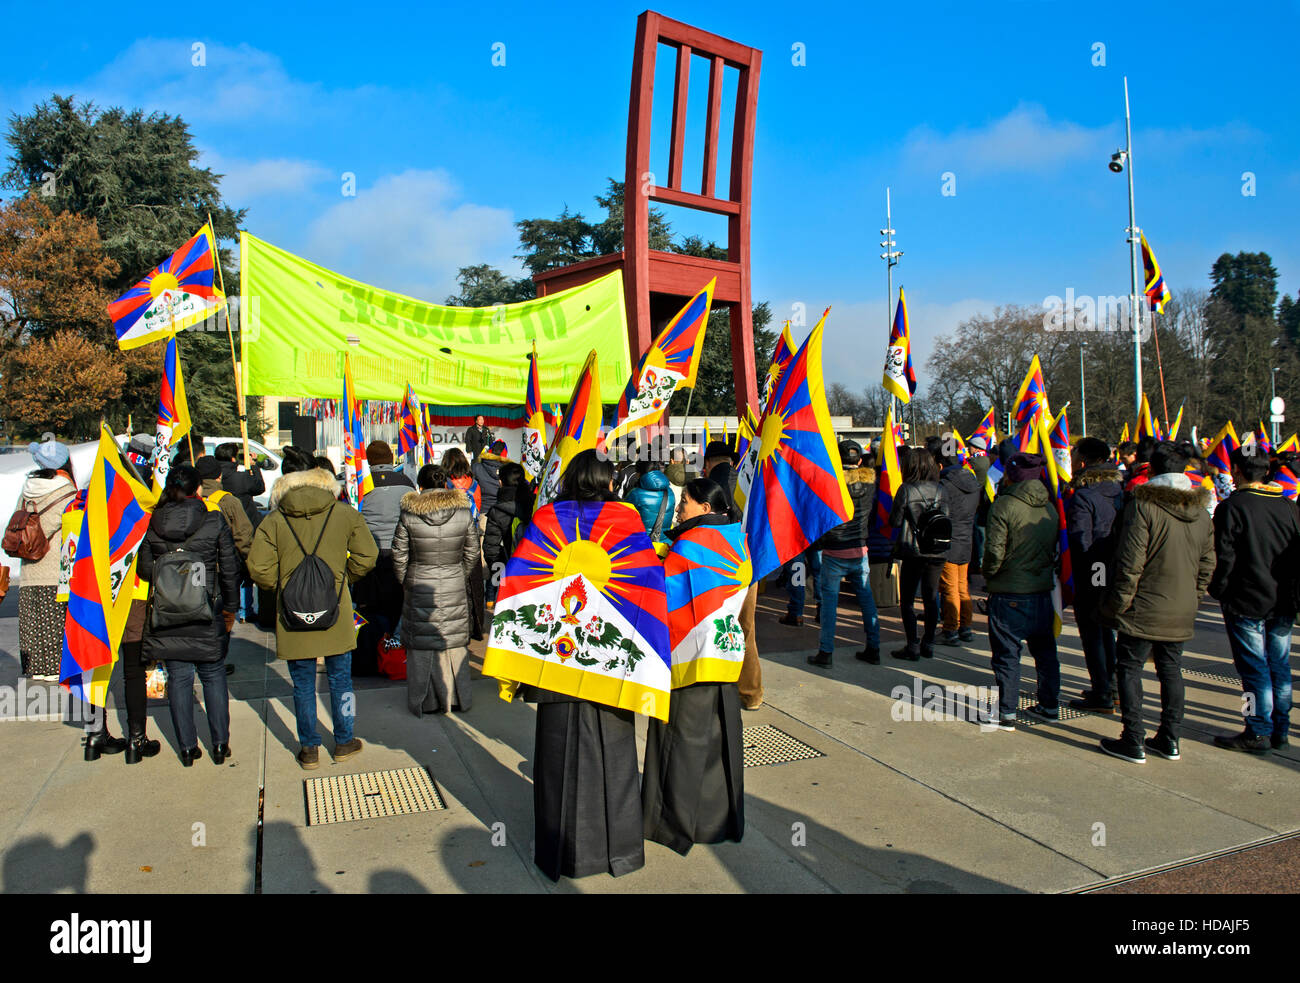 Geneva, Switzerland. 10 December 2016. On the occasion of the Human Rights Day 2016 and in commemoration of the 27th anniversary of the conferment of the Nobel Peace Prize to the Dalai Lama, members of the Tibetan Community in Switzerland and Liechtenstein gather on 10 December 2016 in Geneva, Switzerland, on the Place des Nations in front of the United Nations European headquarters for a protest rally against human rights violations in Tibet, Geneva, Switzerland Stock Photo